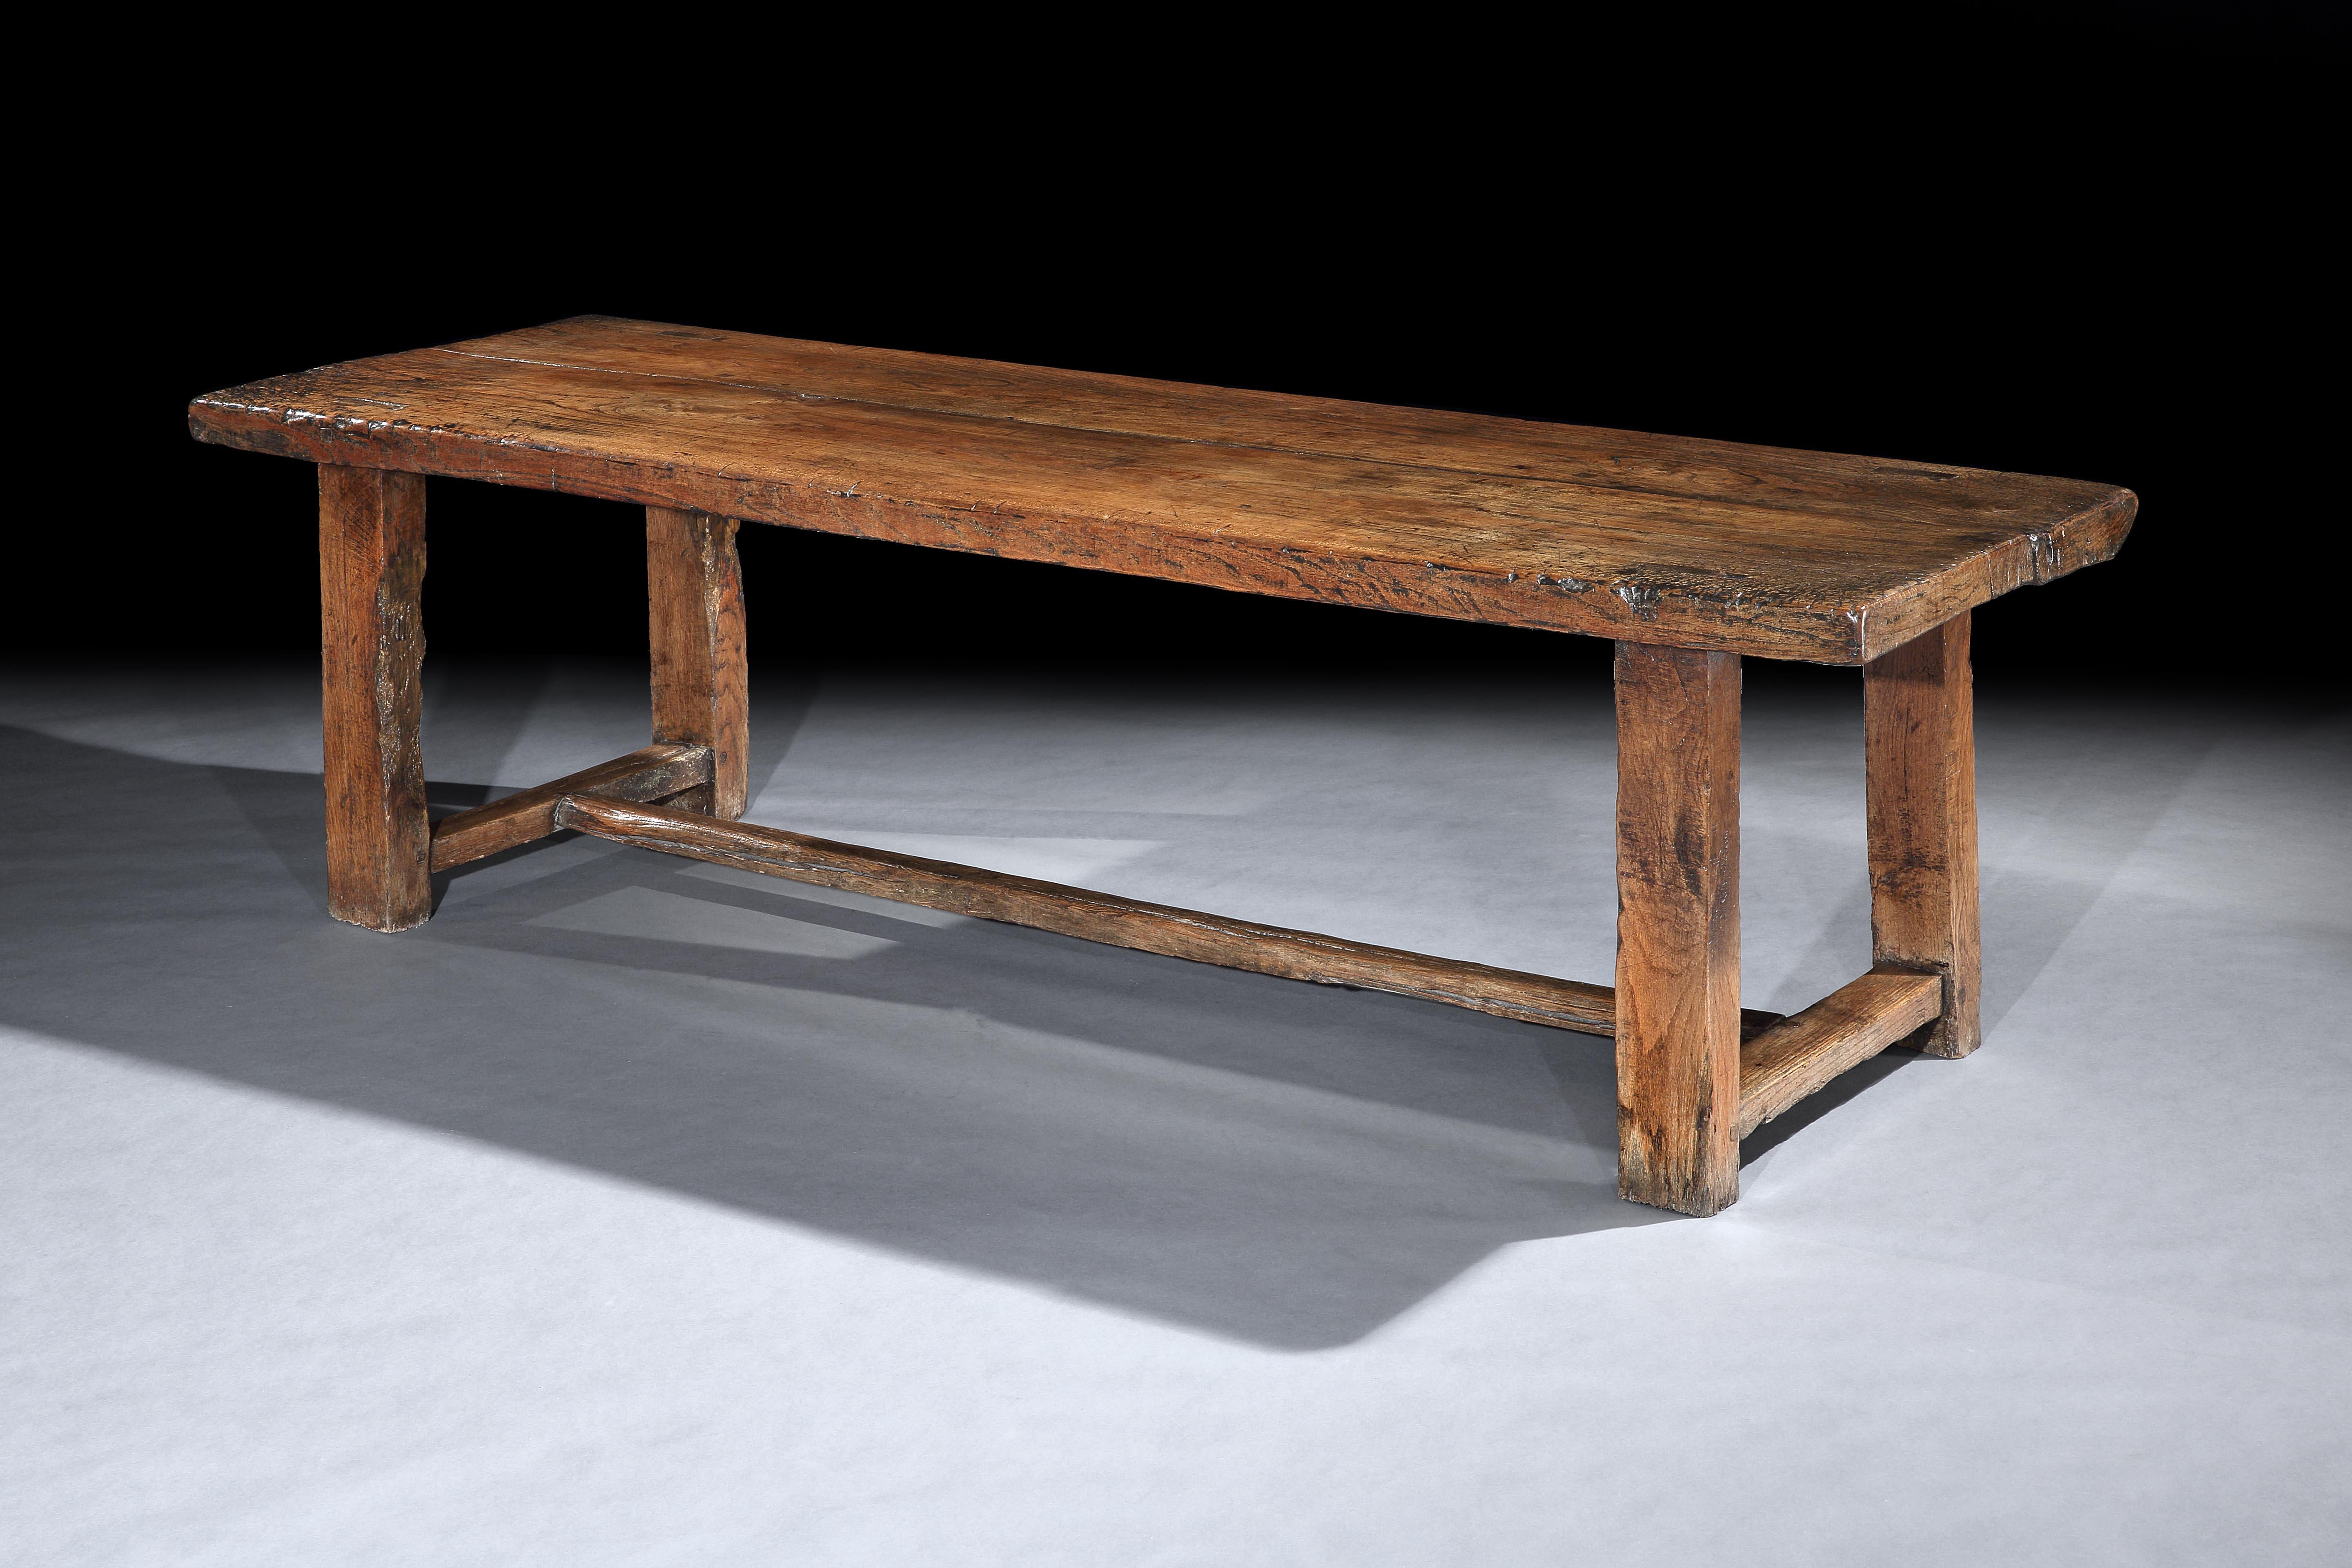 Just purchased more information coming soon

Exceptional figuring, condition, color and patina
Comprising two planks one 17.5” 44 wide the other 14” 36 cm

Tables made from massive boards of oak or elm were the most common type of early dining table